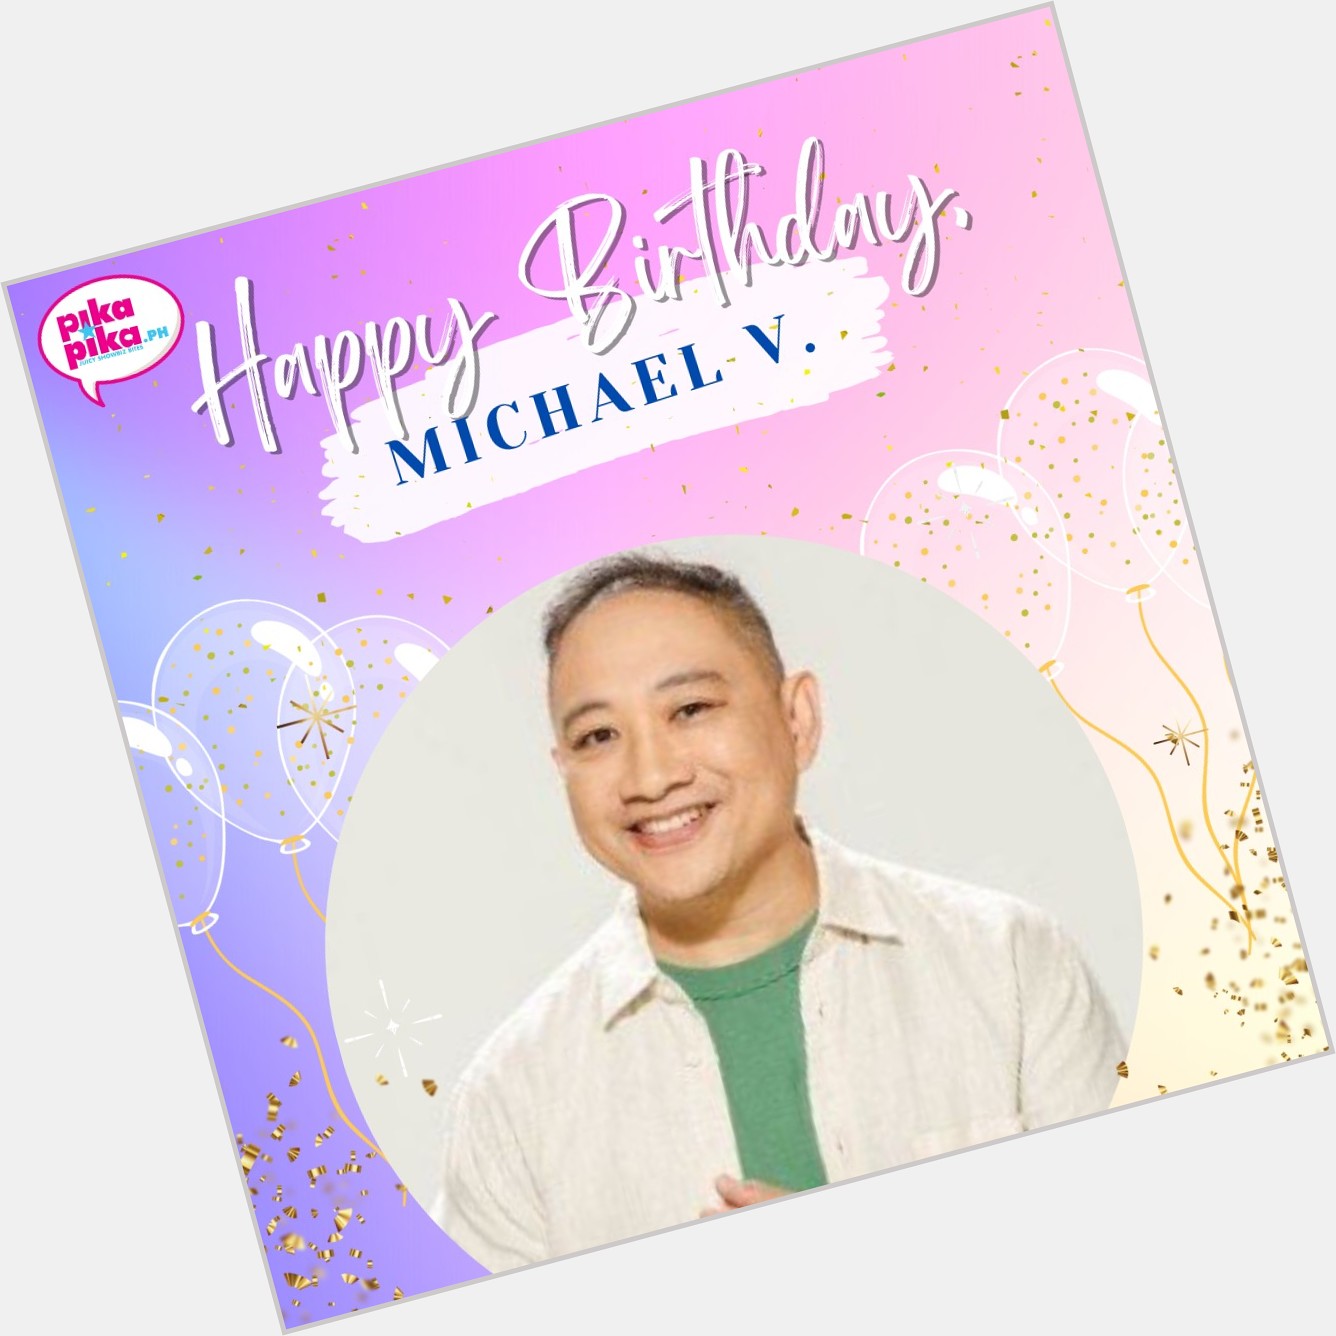 Happy birthday, Michael V! May your special day be filled with love and cheers.     